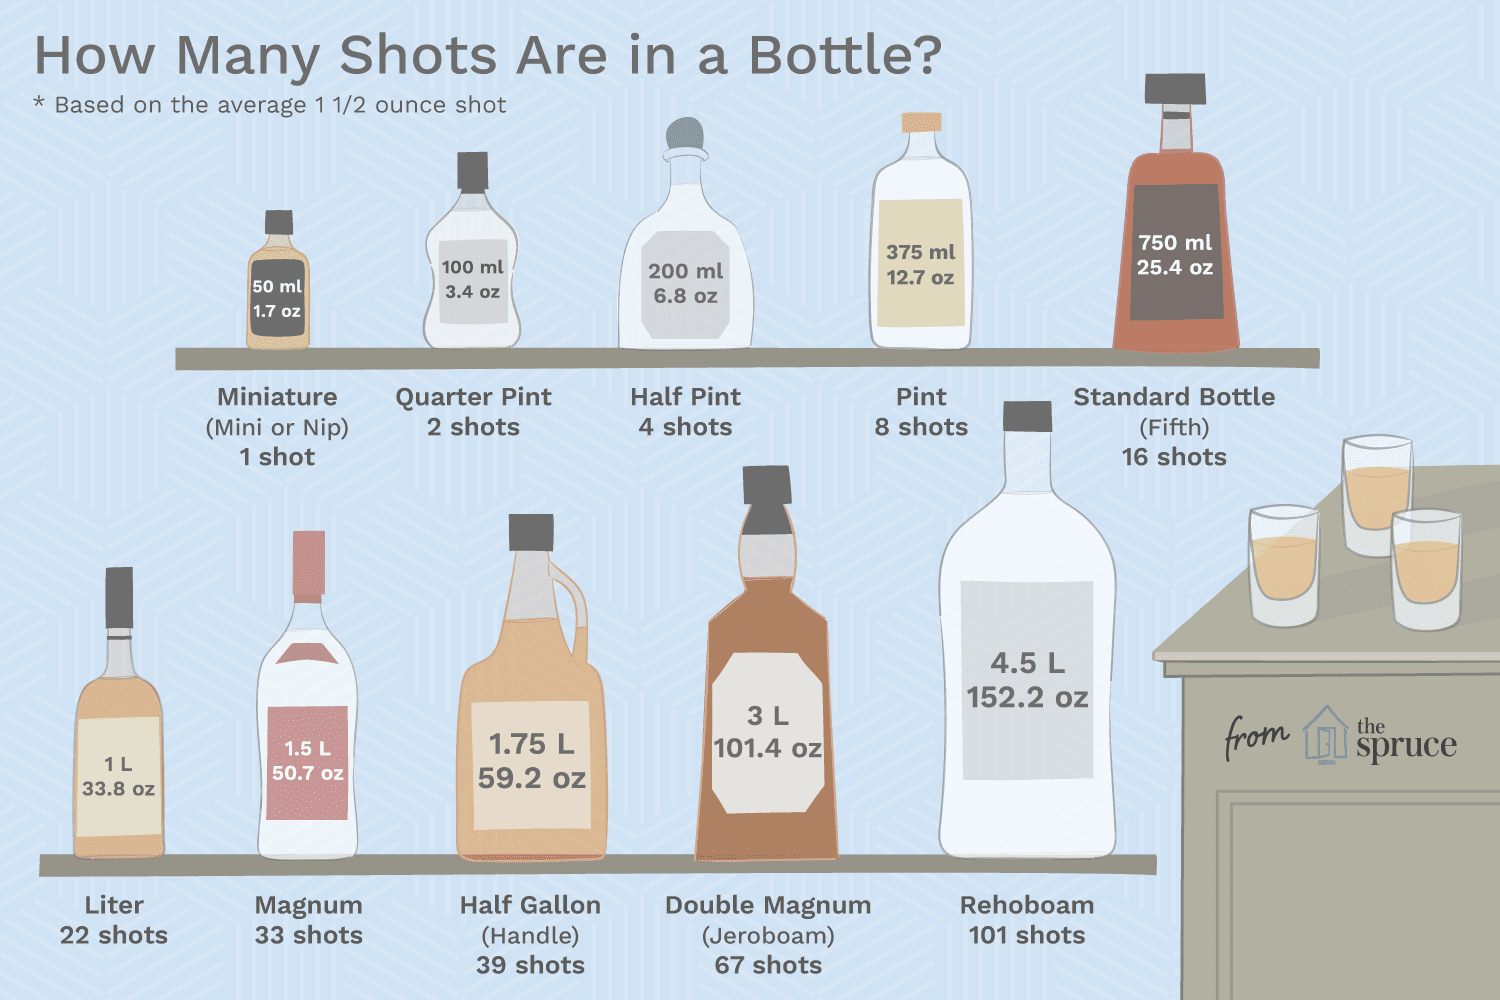 SPR_761232-how-many-shots-in-a-bottle.png.03505838fc3dc4aed3f20c76c29fd5e0.png